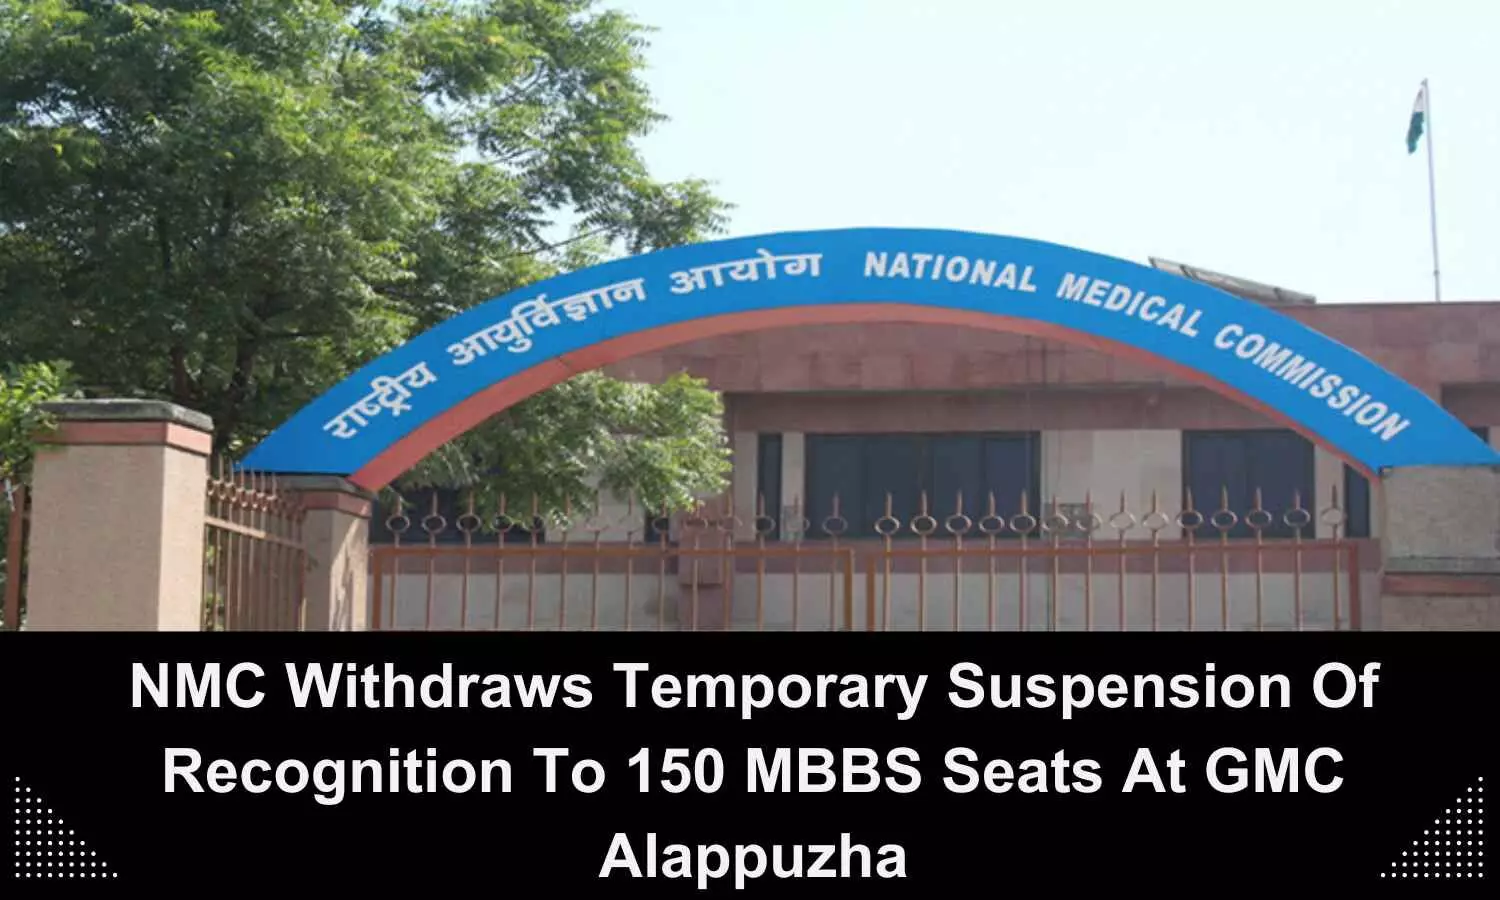 NMC withdraws temporary suspension of recognition to 150 MBBS seats at GMC Alappuzha